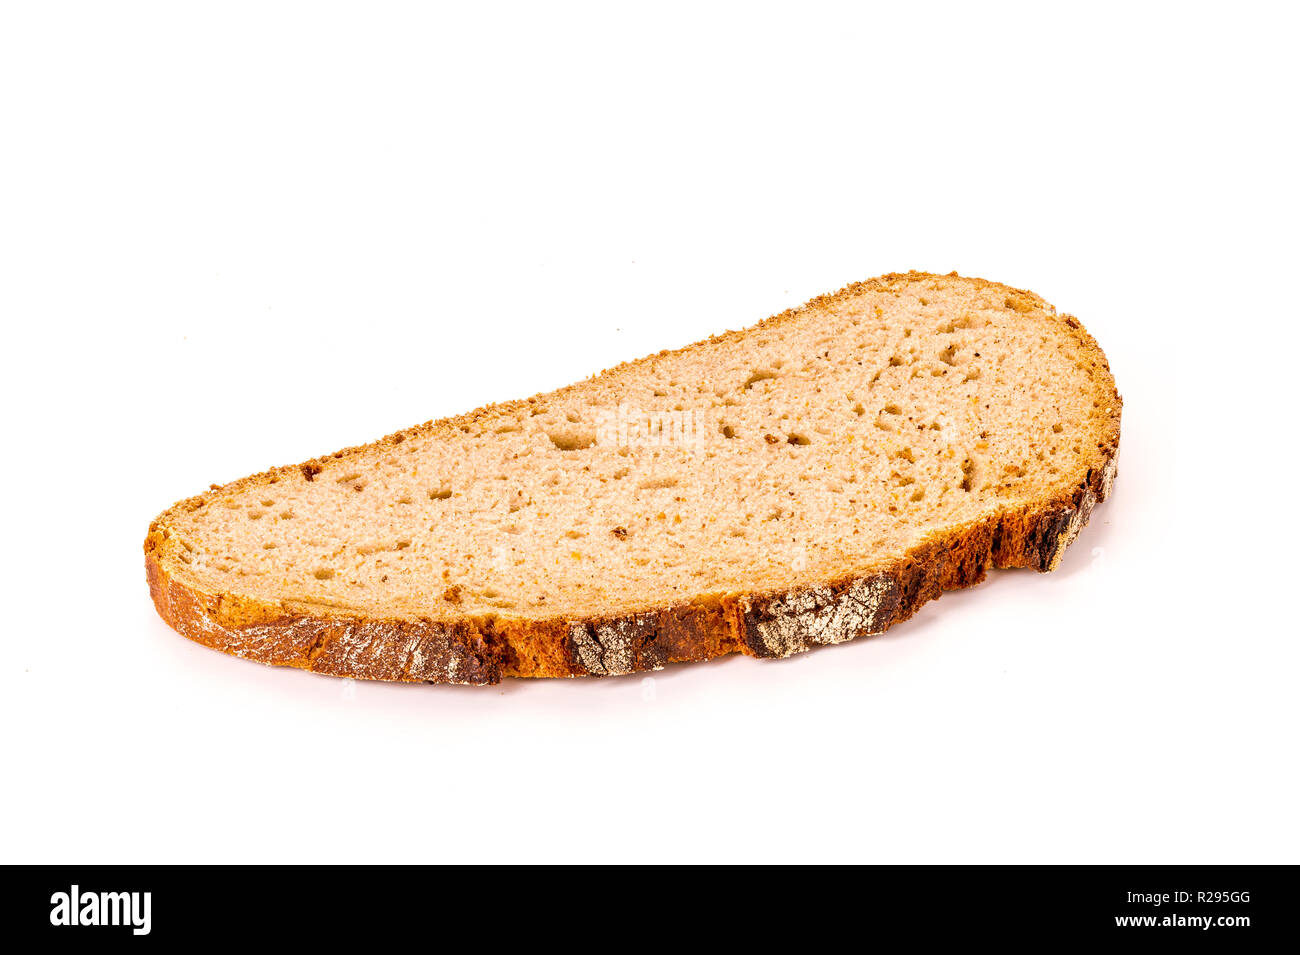 one single slice of bread isolated on white background, front view Stock Photo